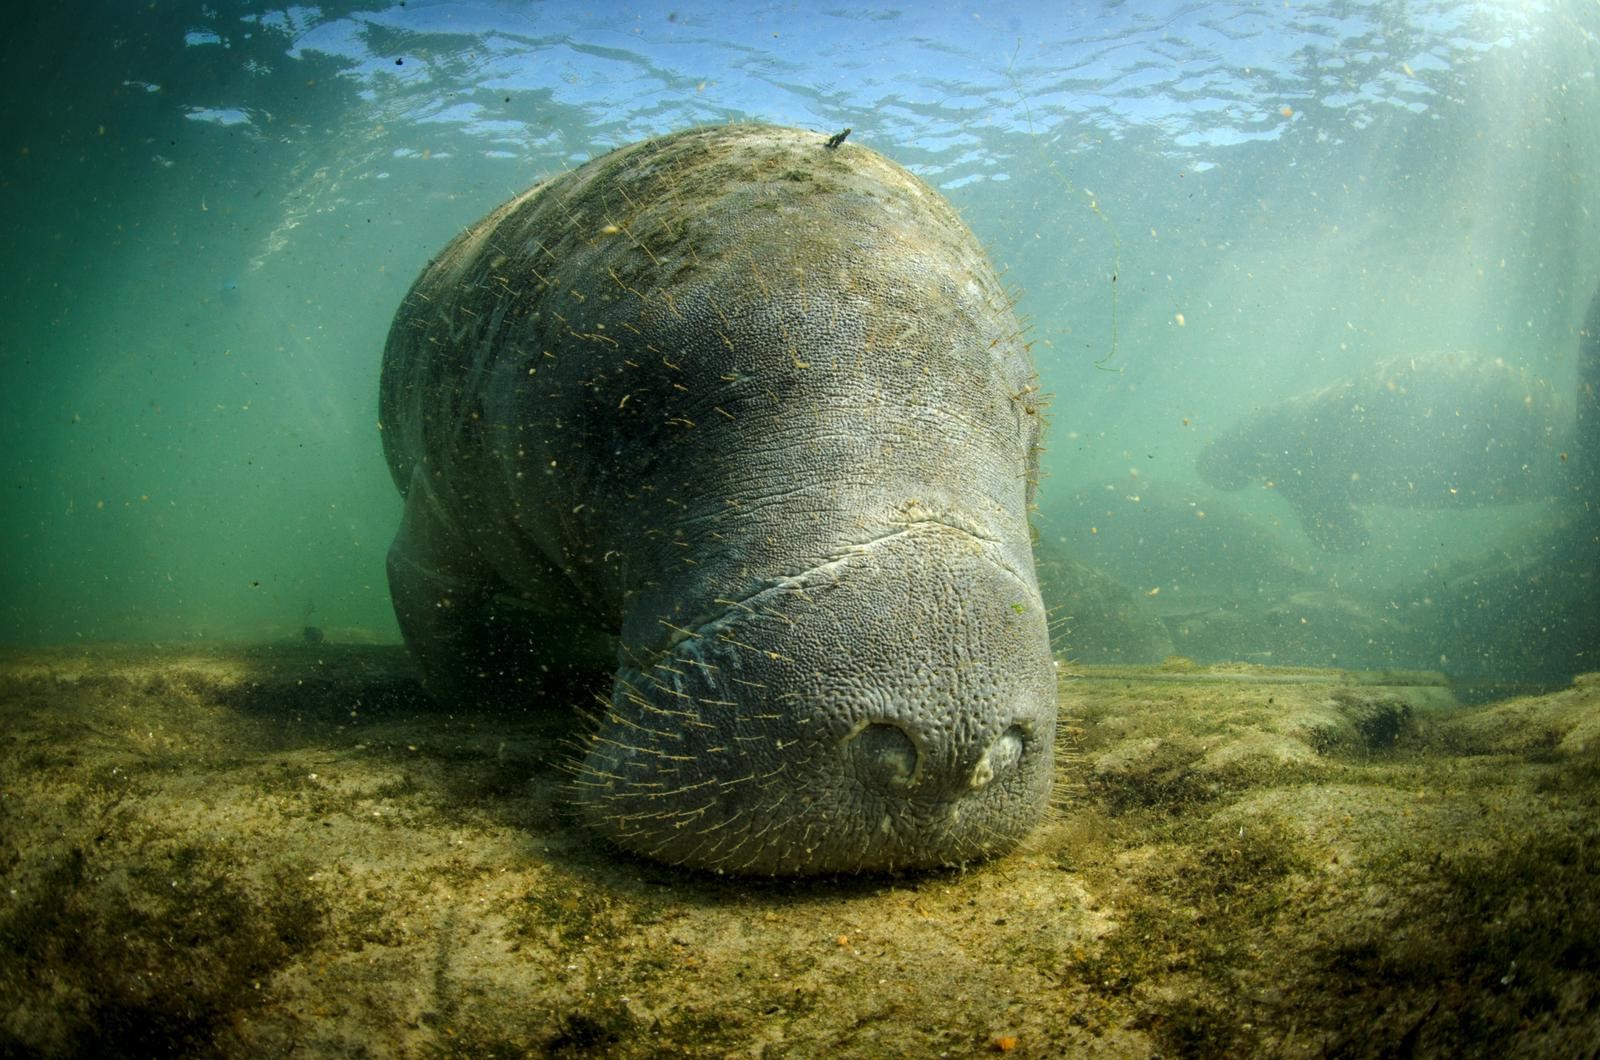 Florida Wildlife Officials Already Making Manatee Preparations For Next Winter